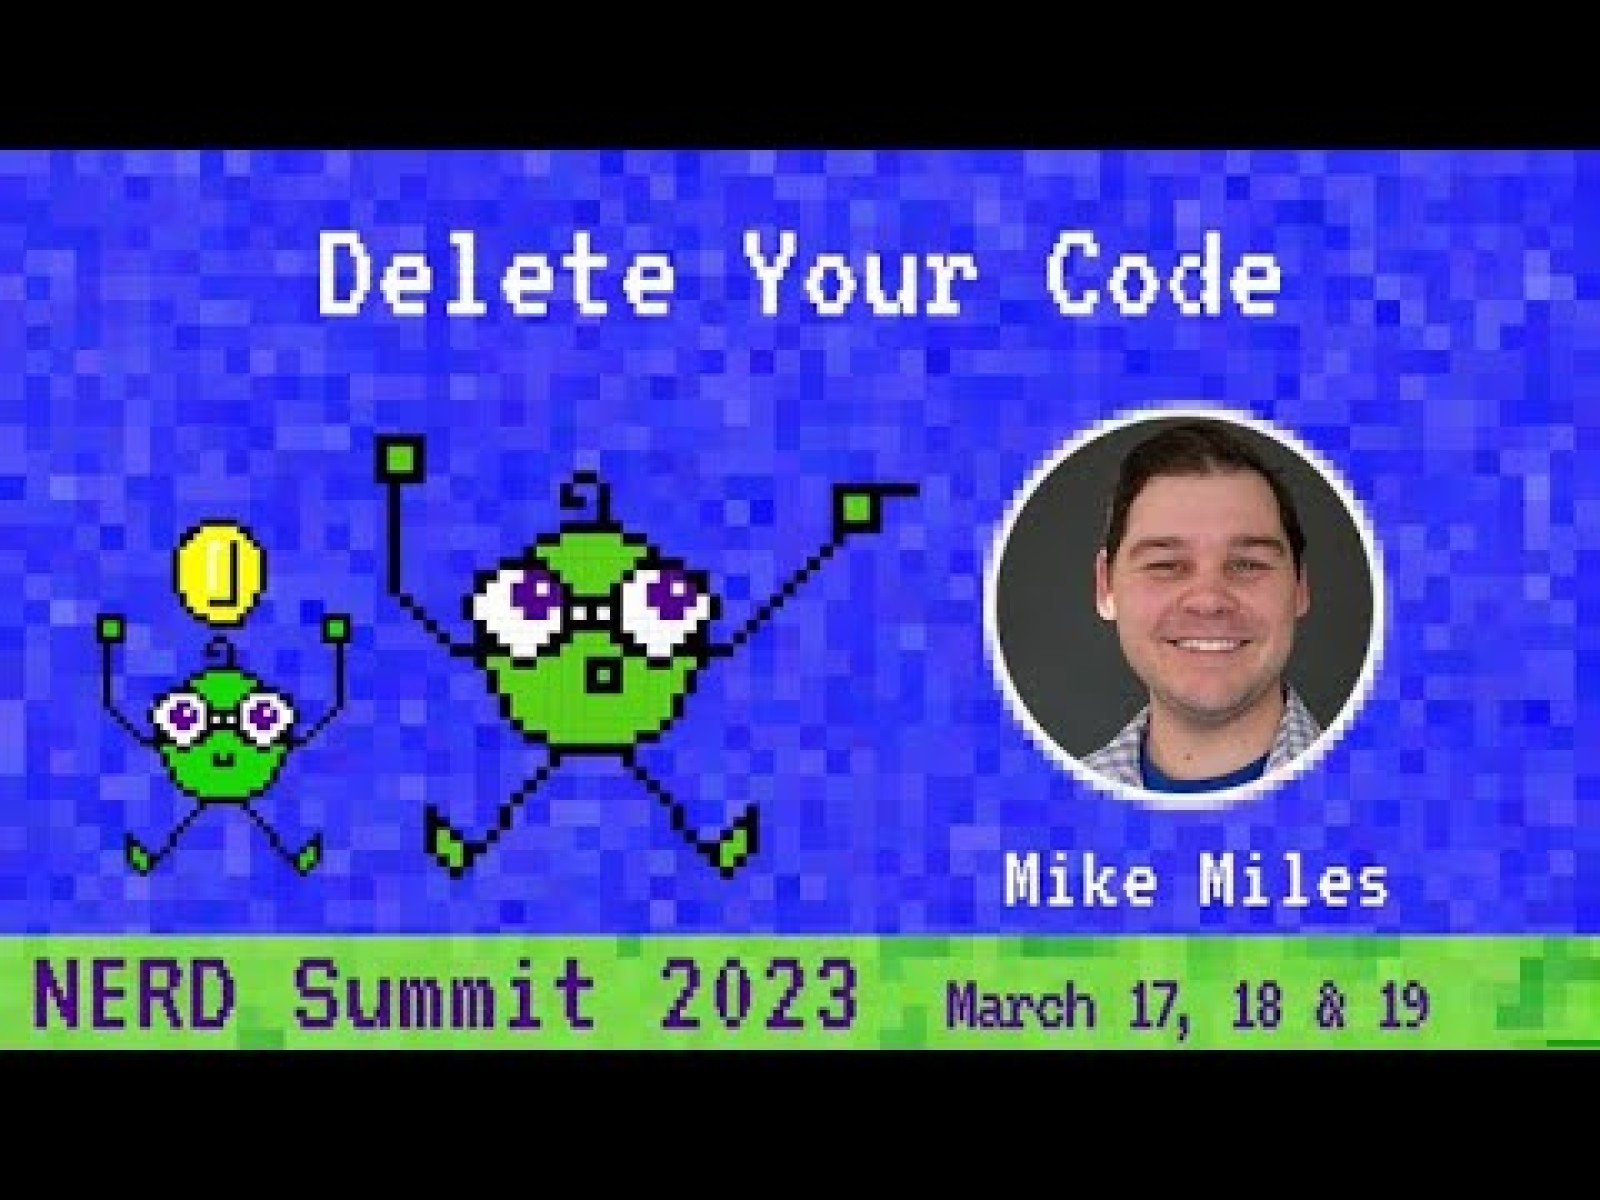 Delete your code by Michael Miles